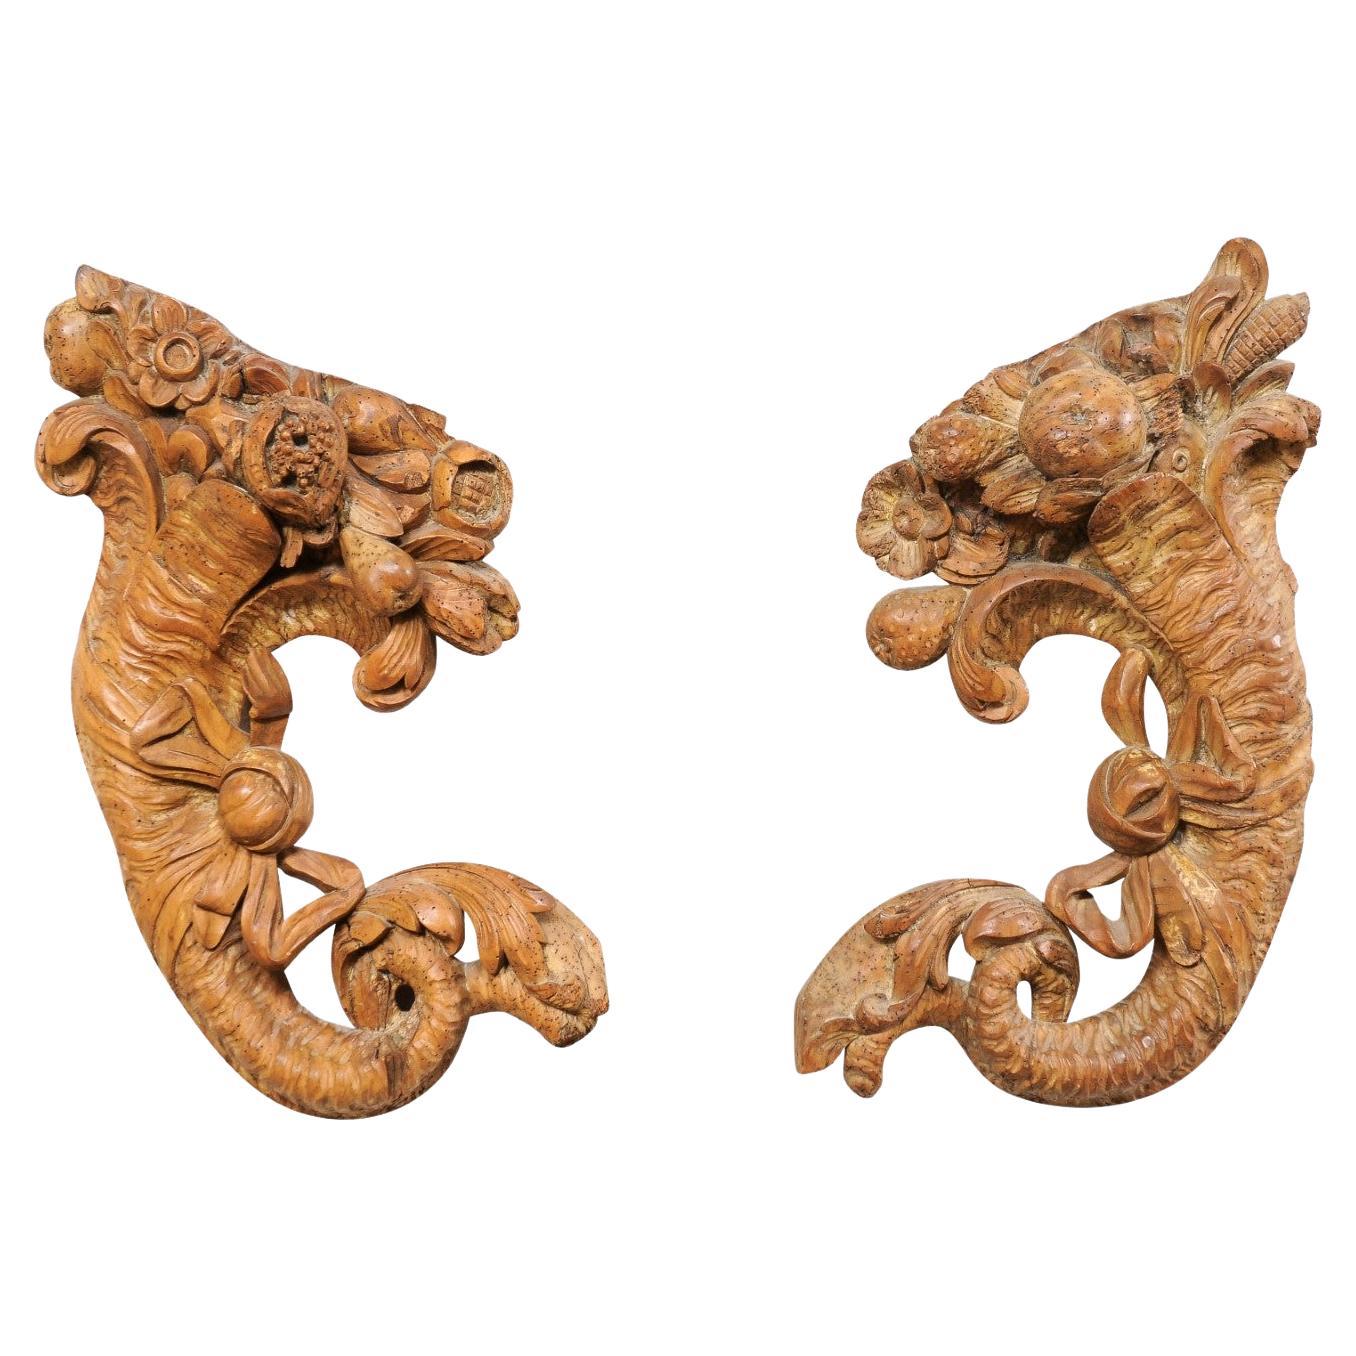 French Pair of Carved-Wood Cornucopia Wall Plaques, Turn of the 18th and 19th C. For Sale